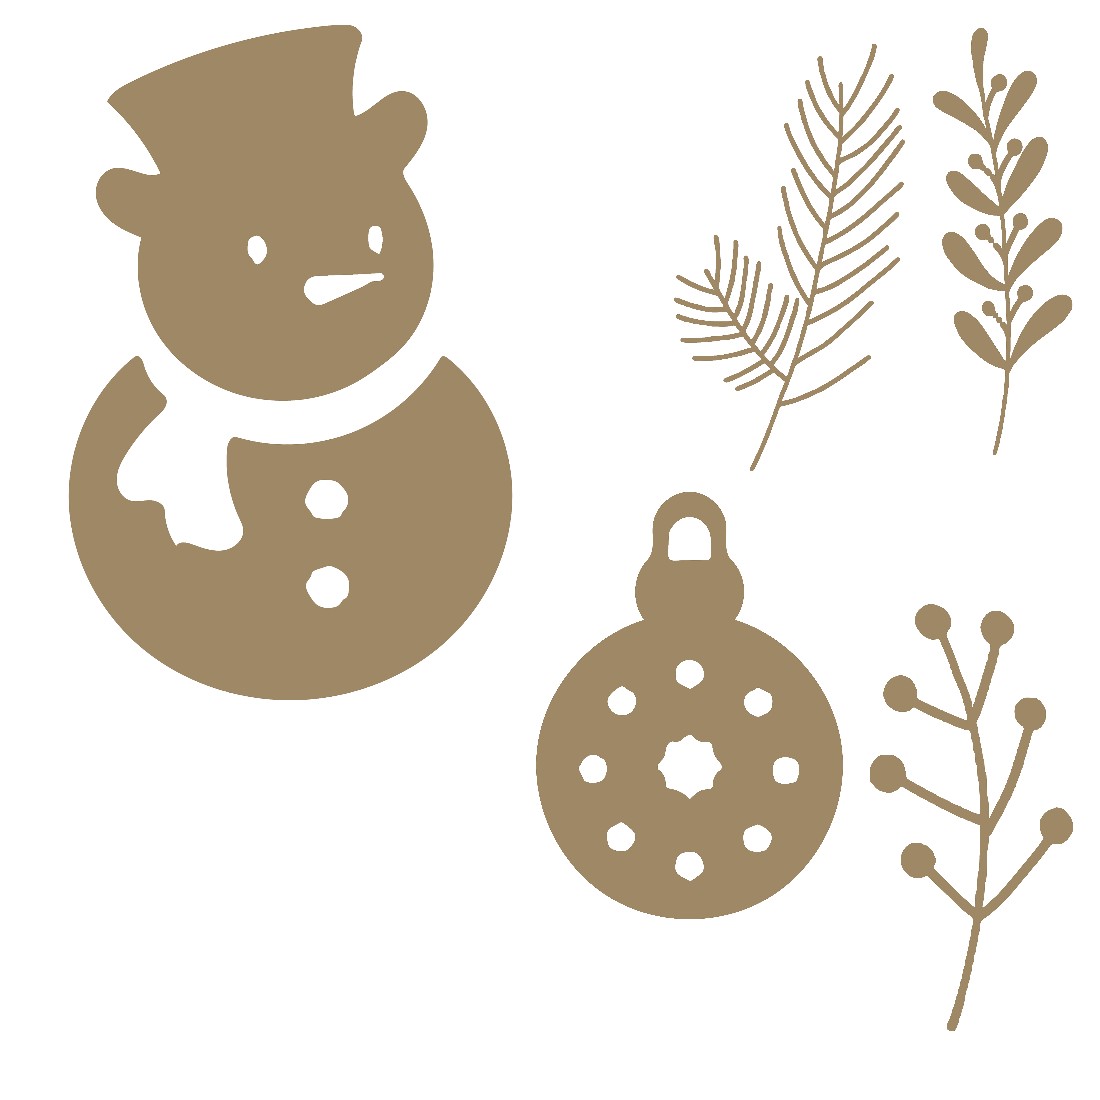 Clay Holiday SVG DXF Icons for Your Projects cover image.